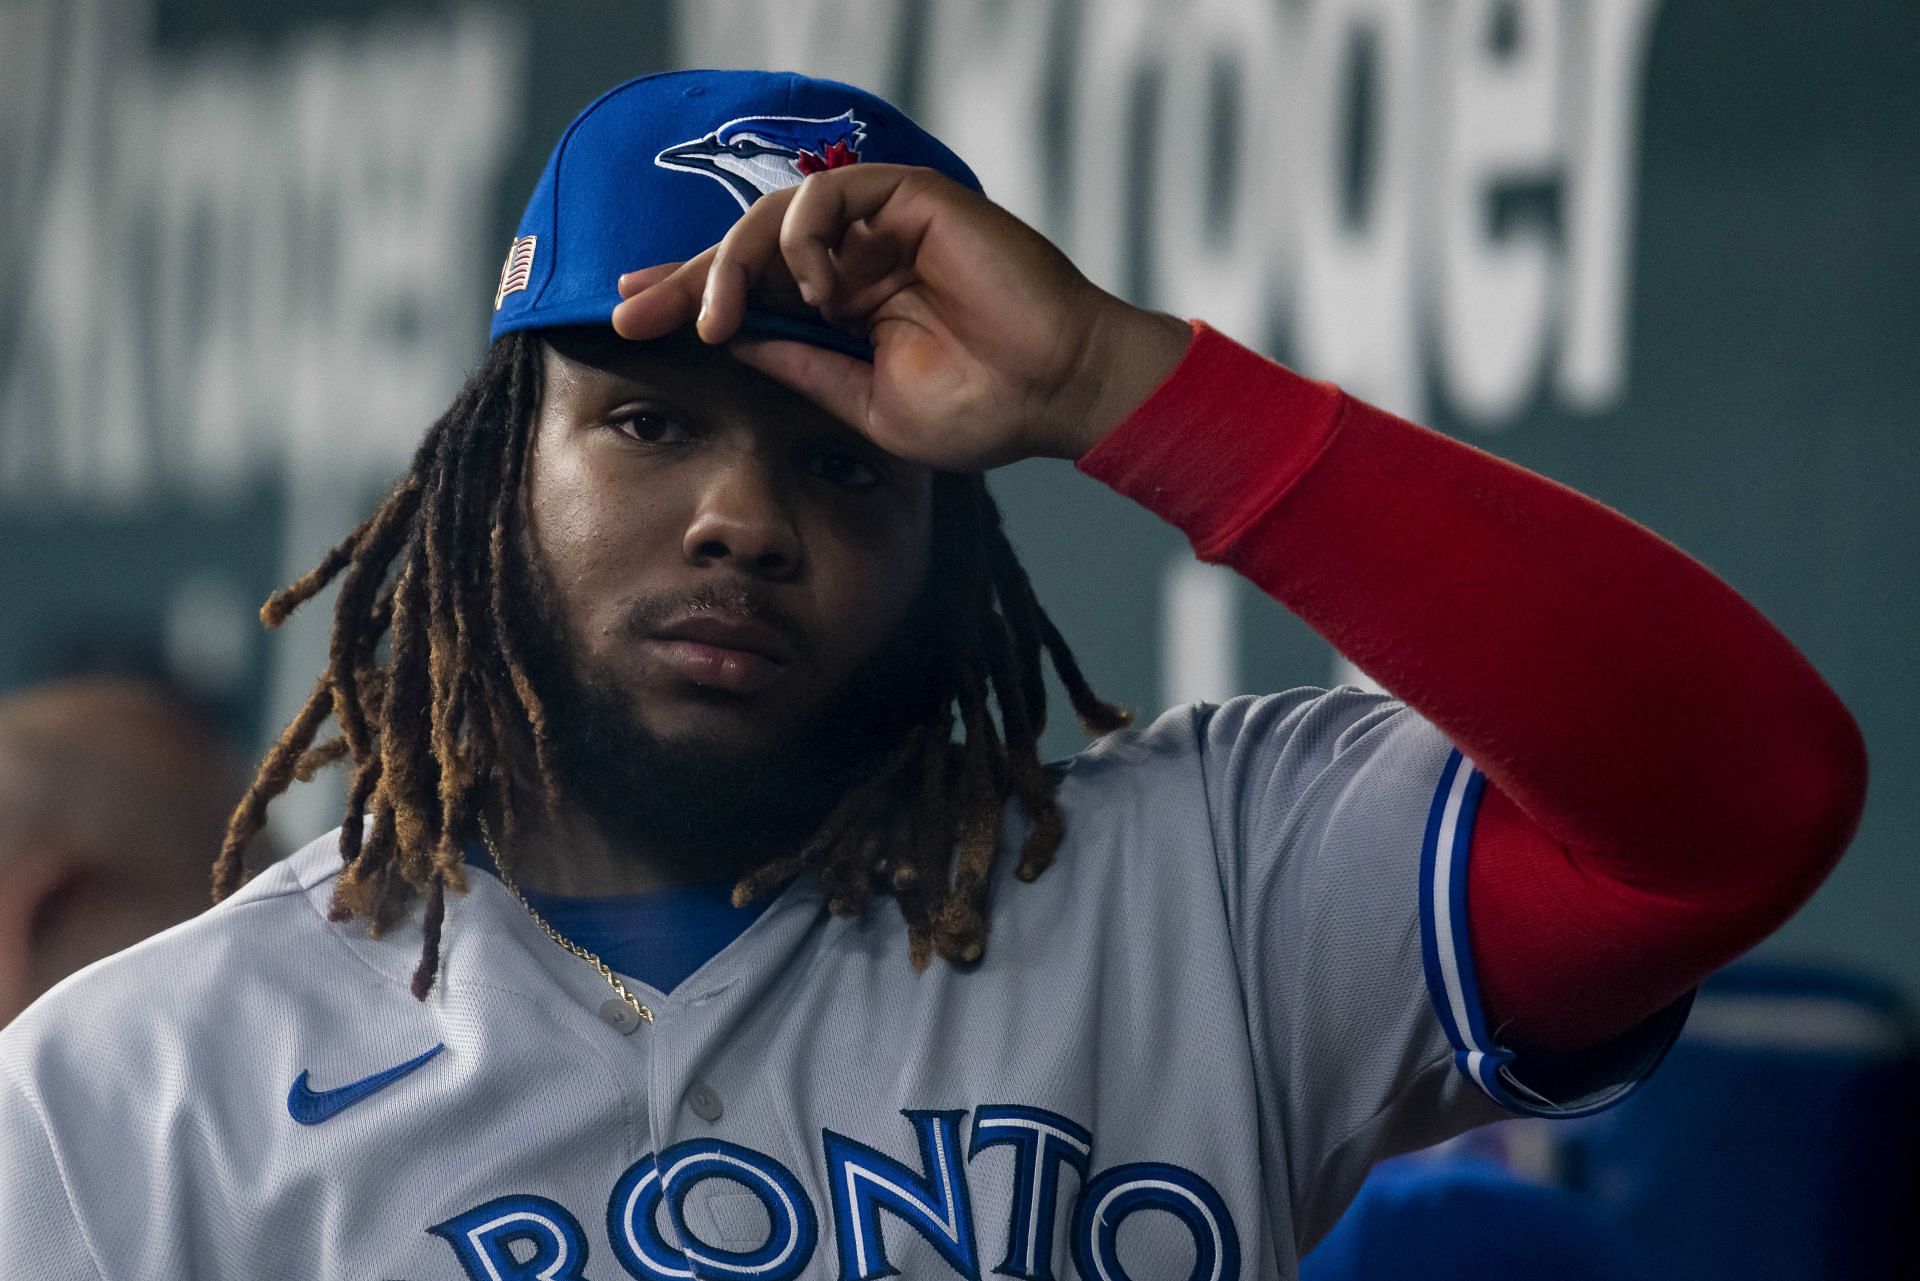 Blue jays are so fake tough it's crazy Toronto just start fights